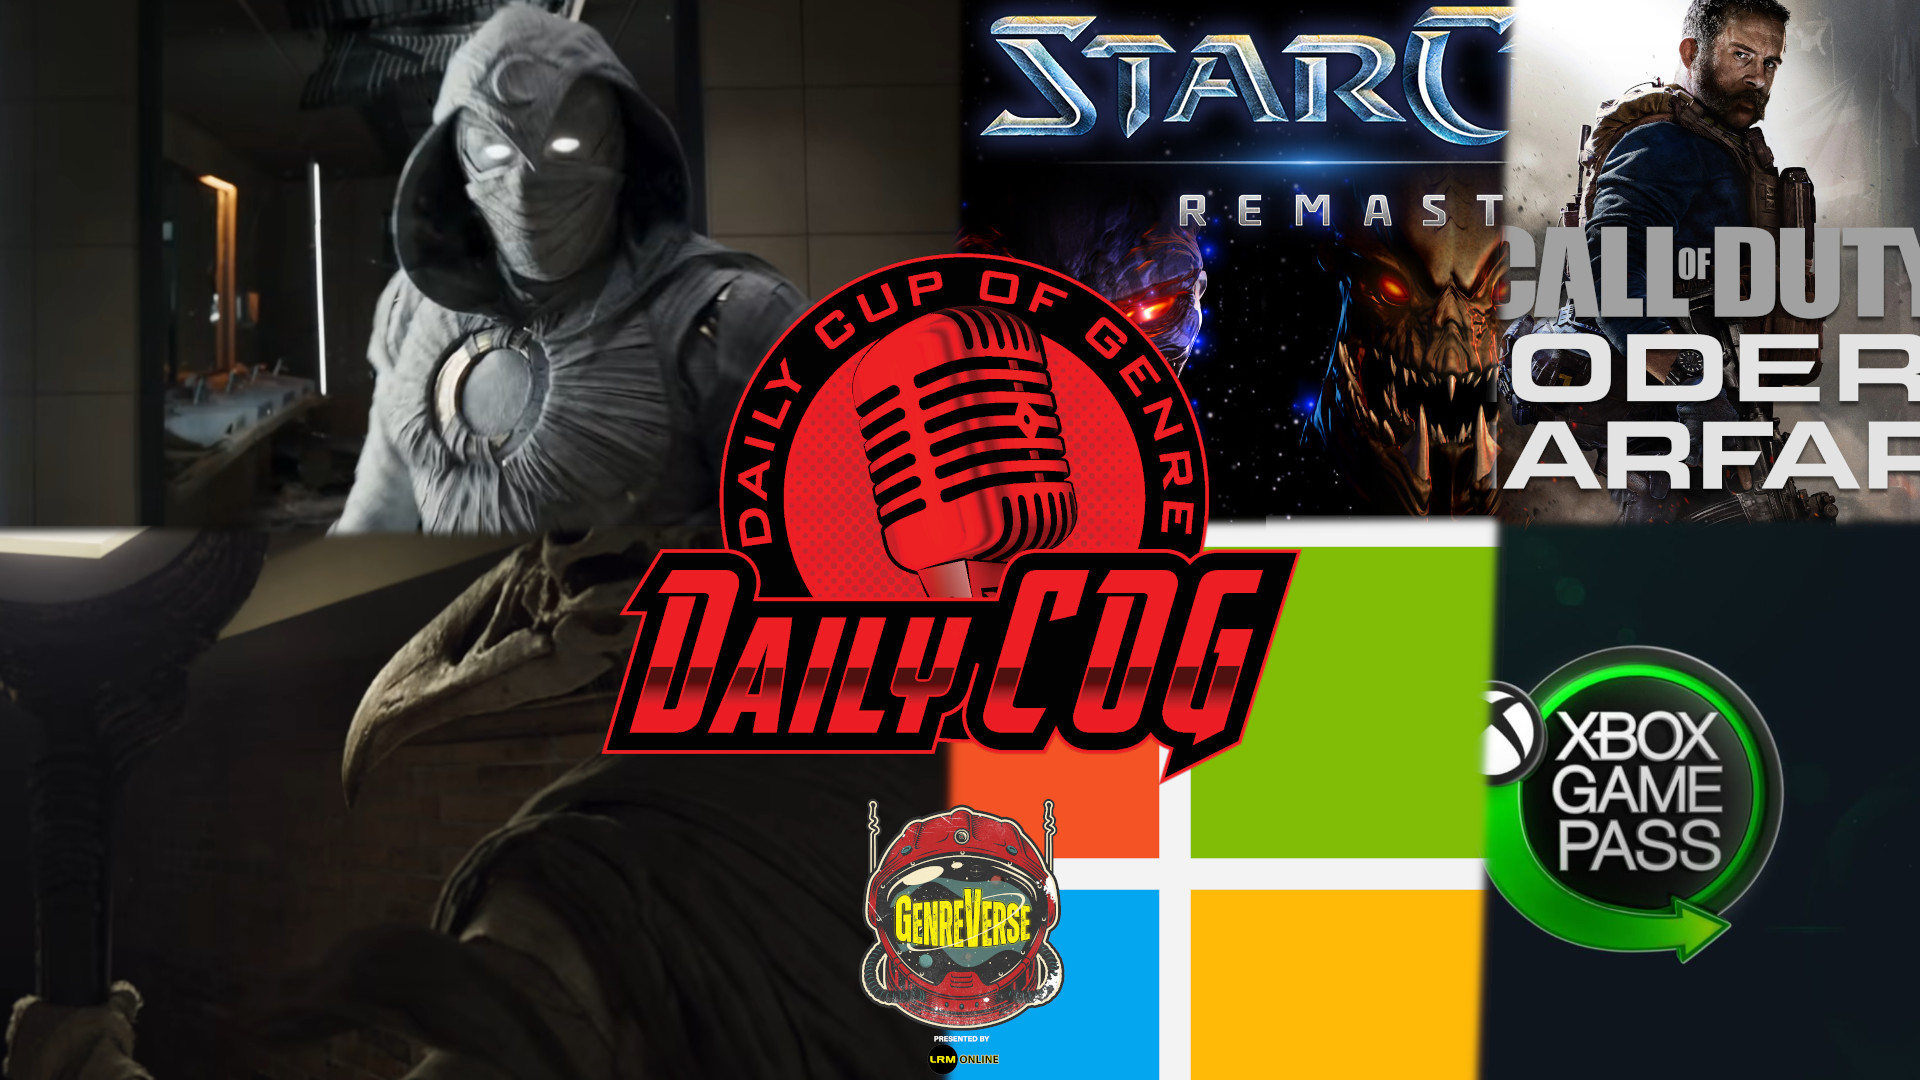 Moon Knight Trailer Reaction (IT’S AMAZING) & Microsoft To Buy Activision Blizzard | Daily COG